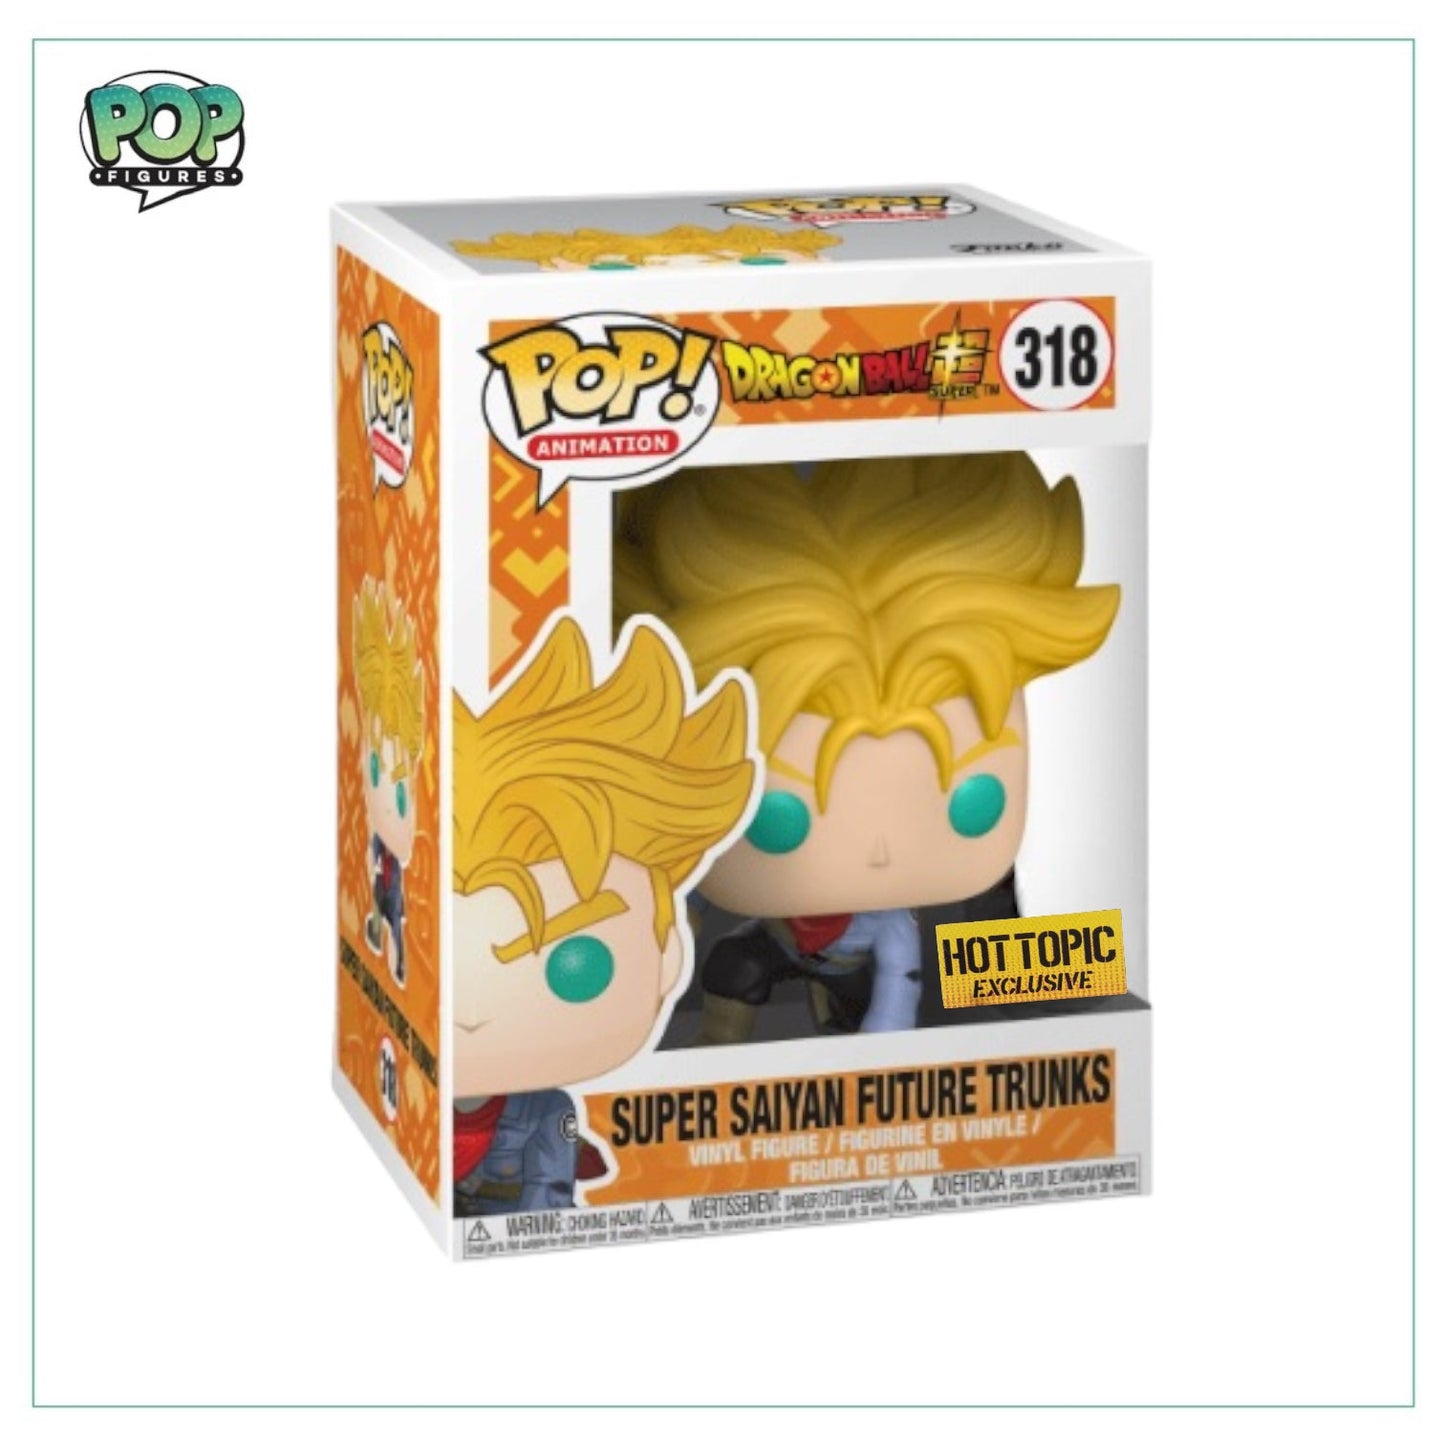 Super Saiyan Future Trunks #318 Funko Pop! - Dragonball Z - Hot Topic Exclusive - Angry Cat